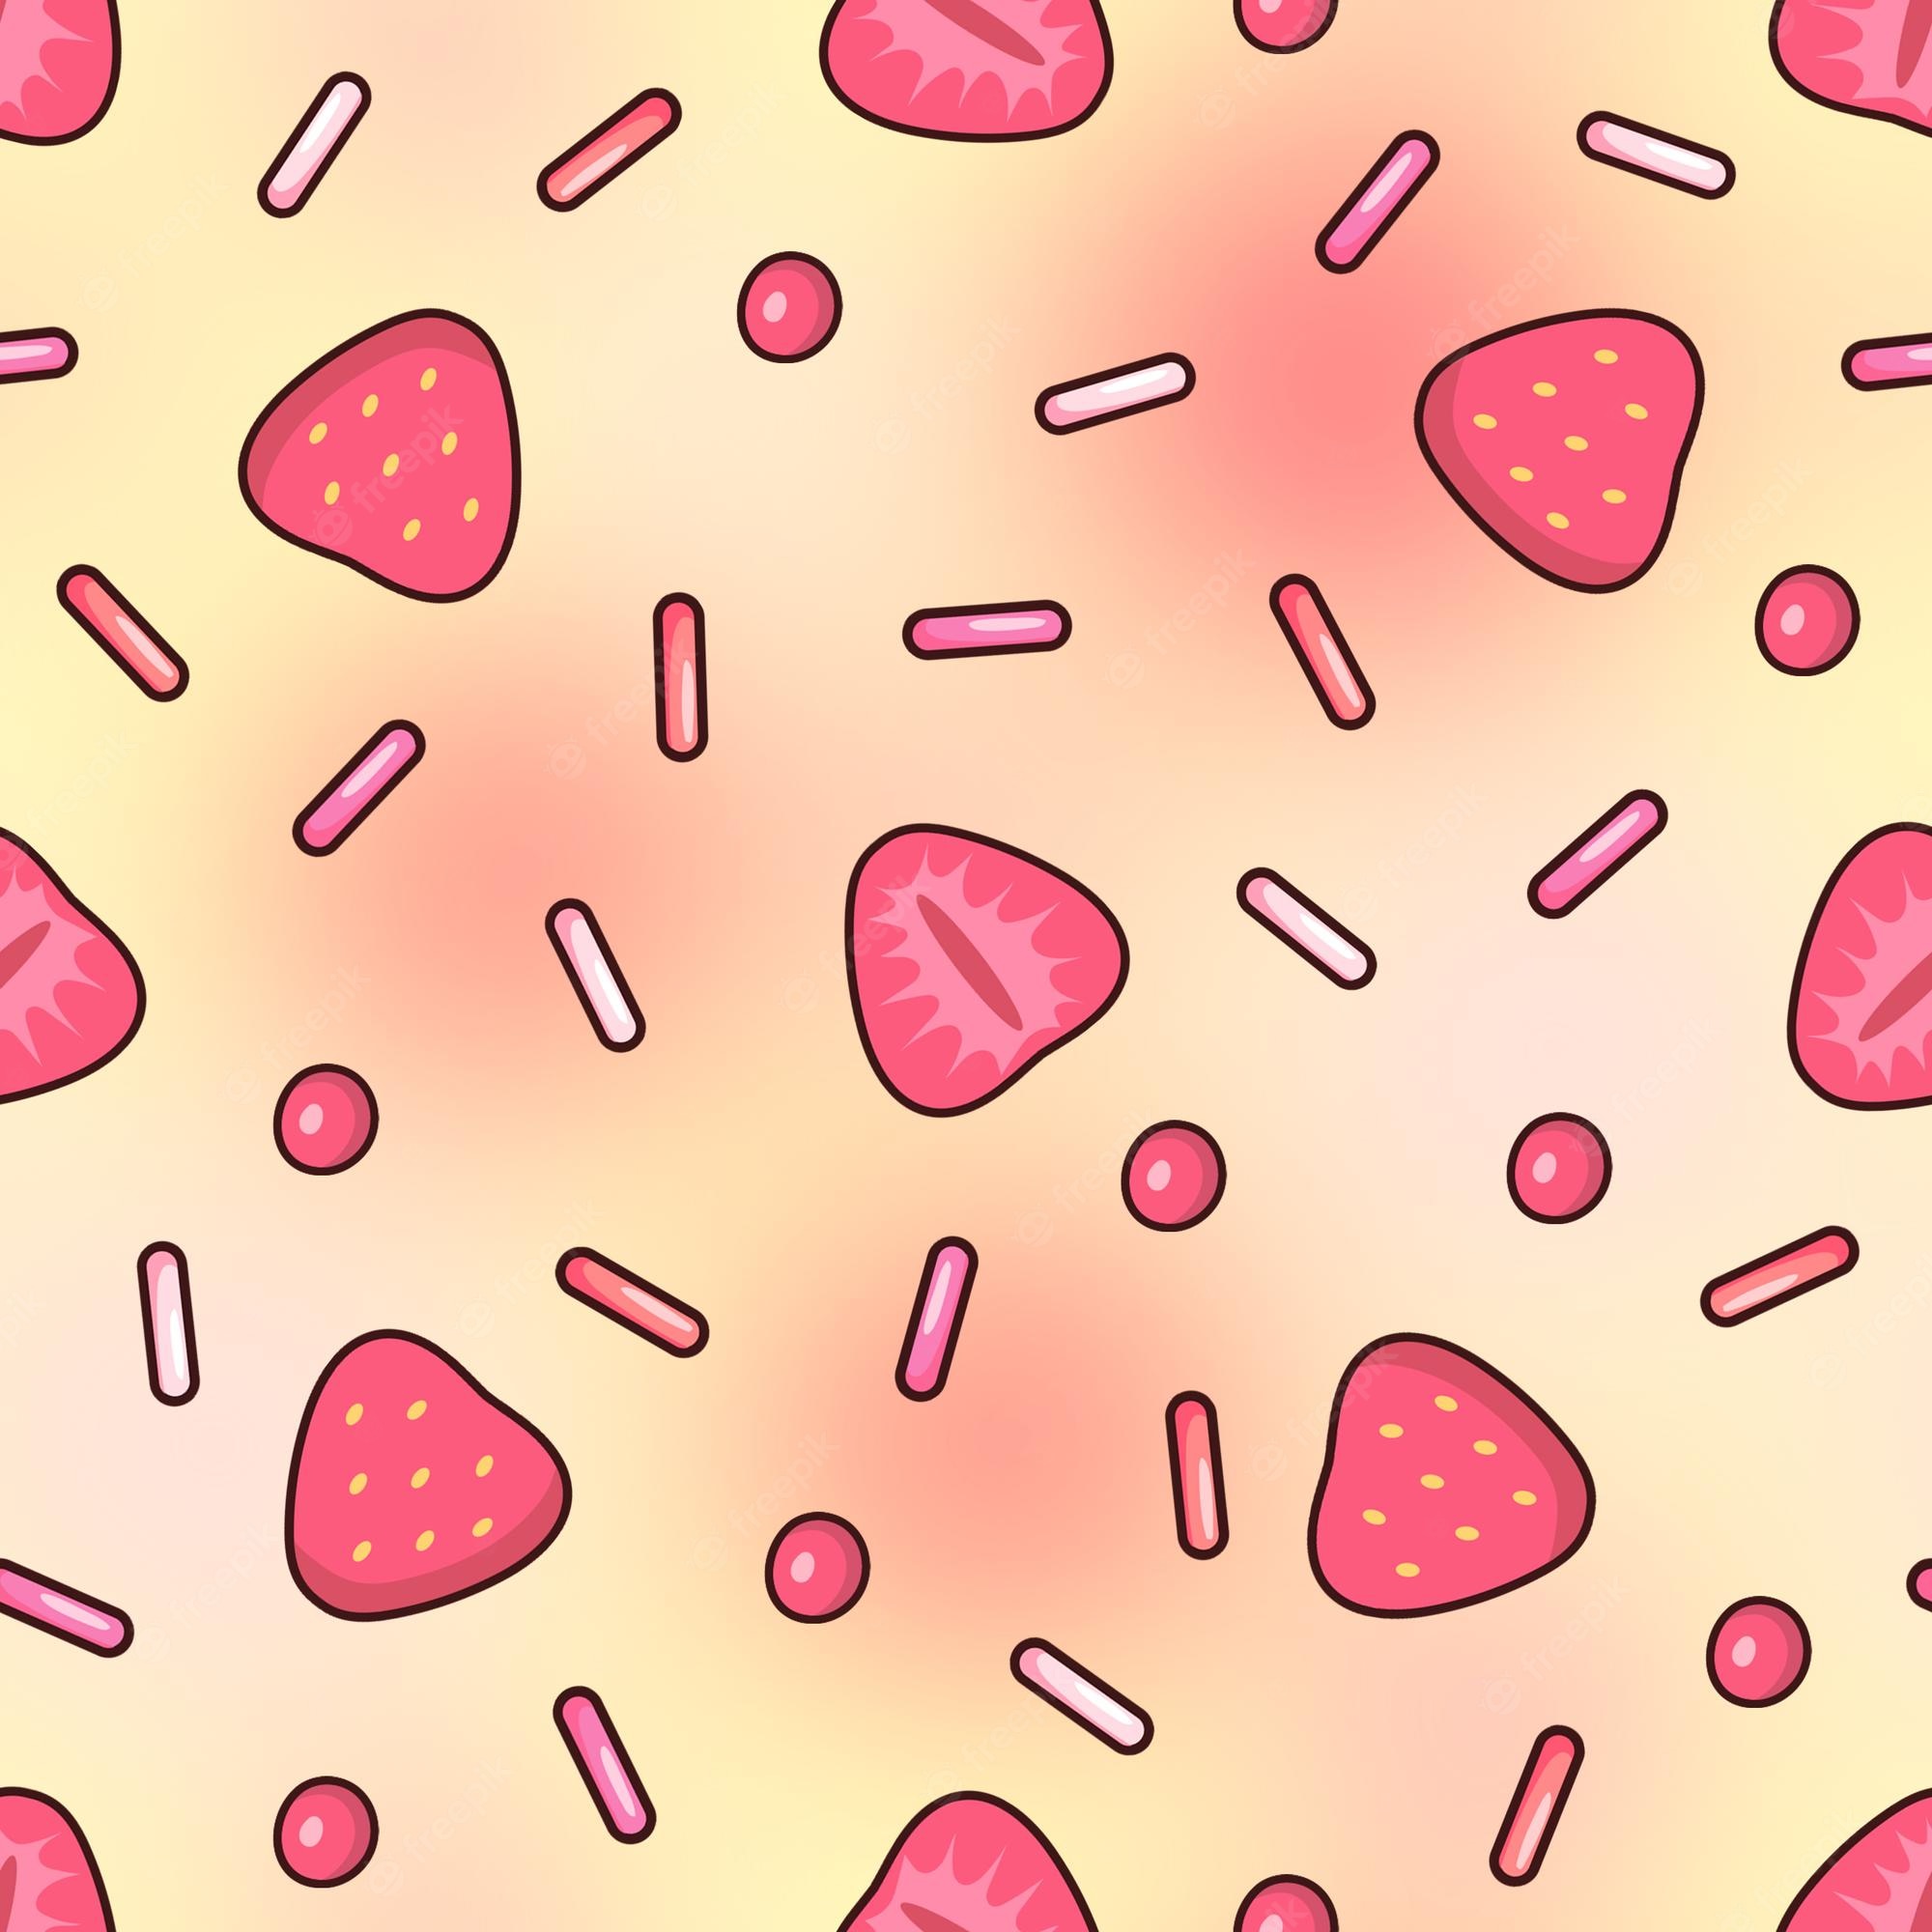 Strawberry wallpaper Vectors & Illustrations for Free Download